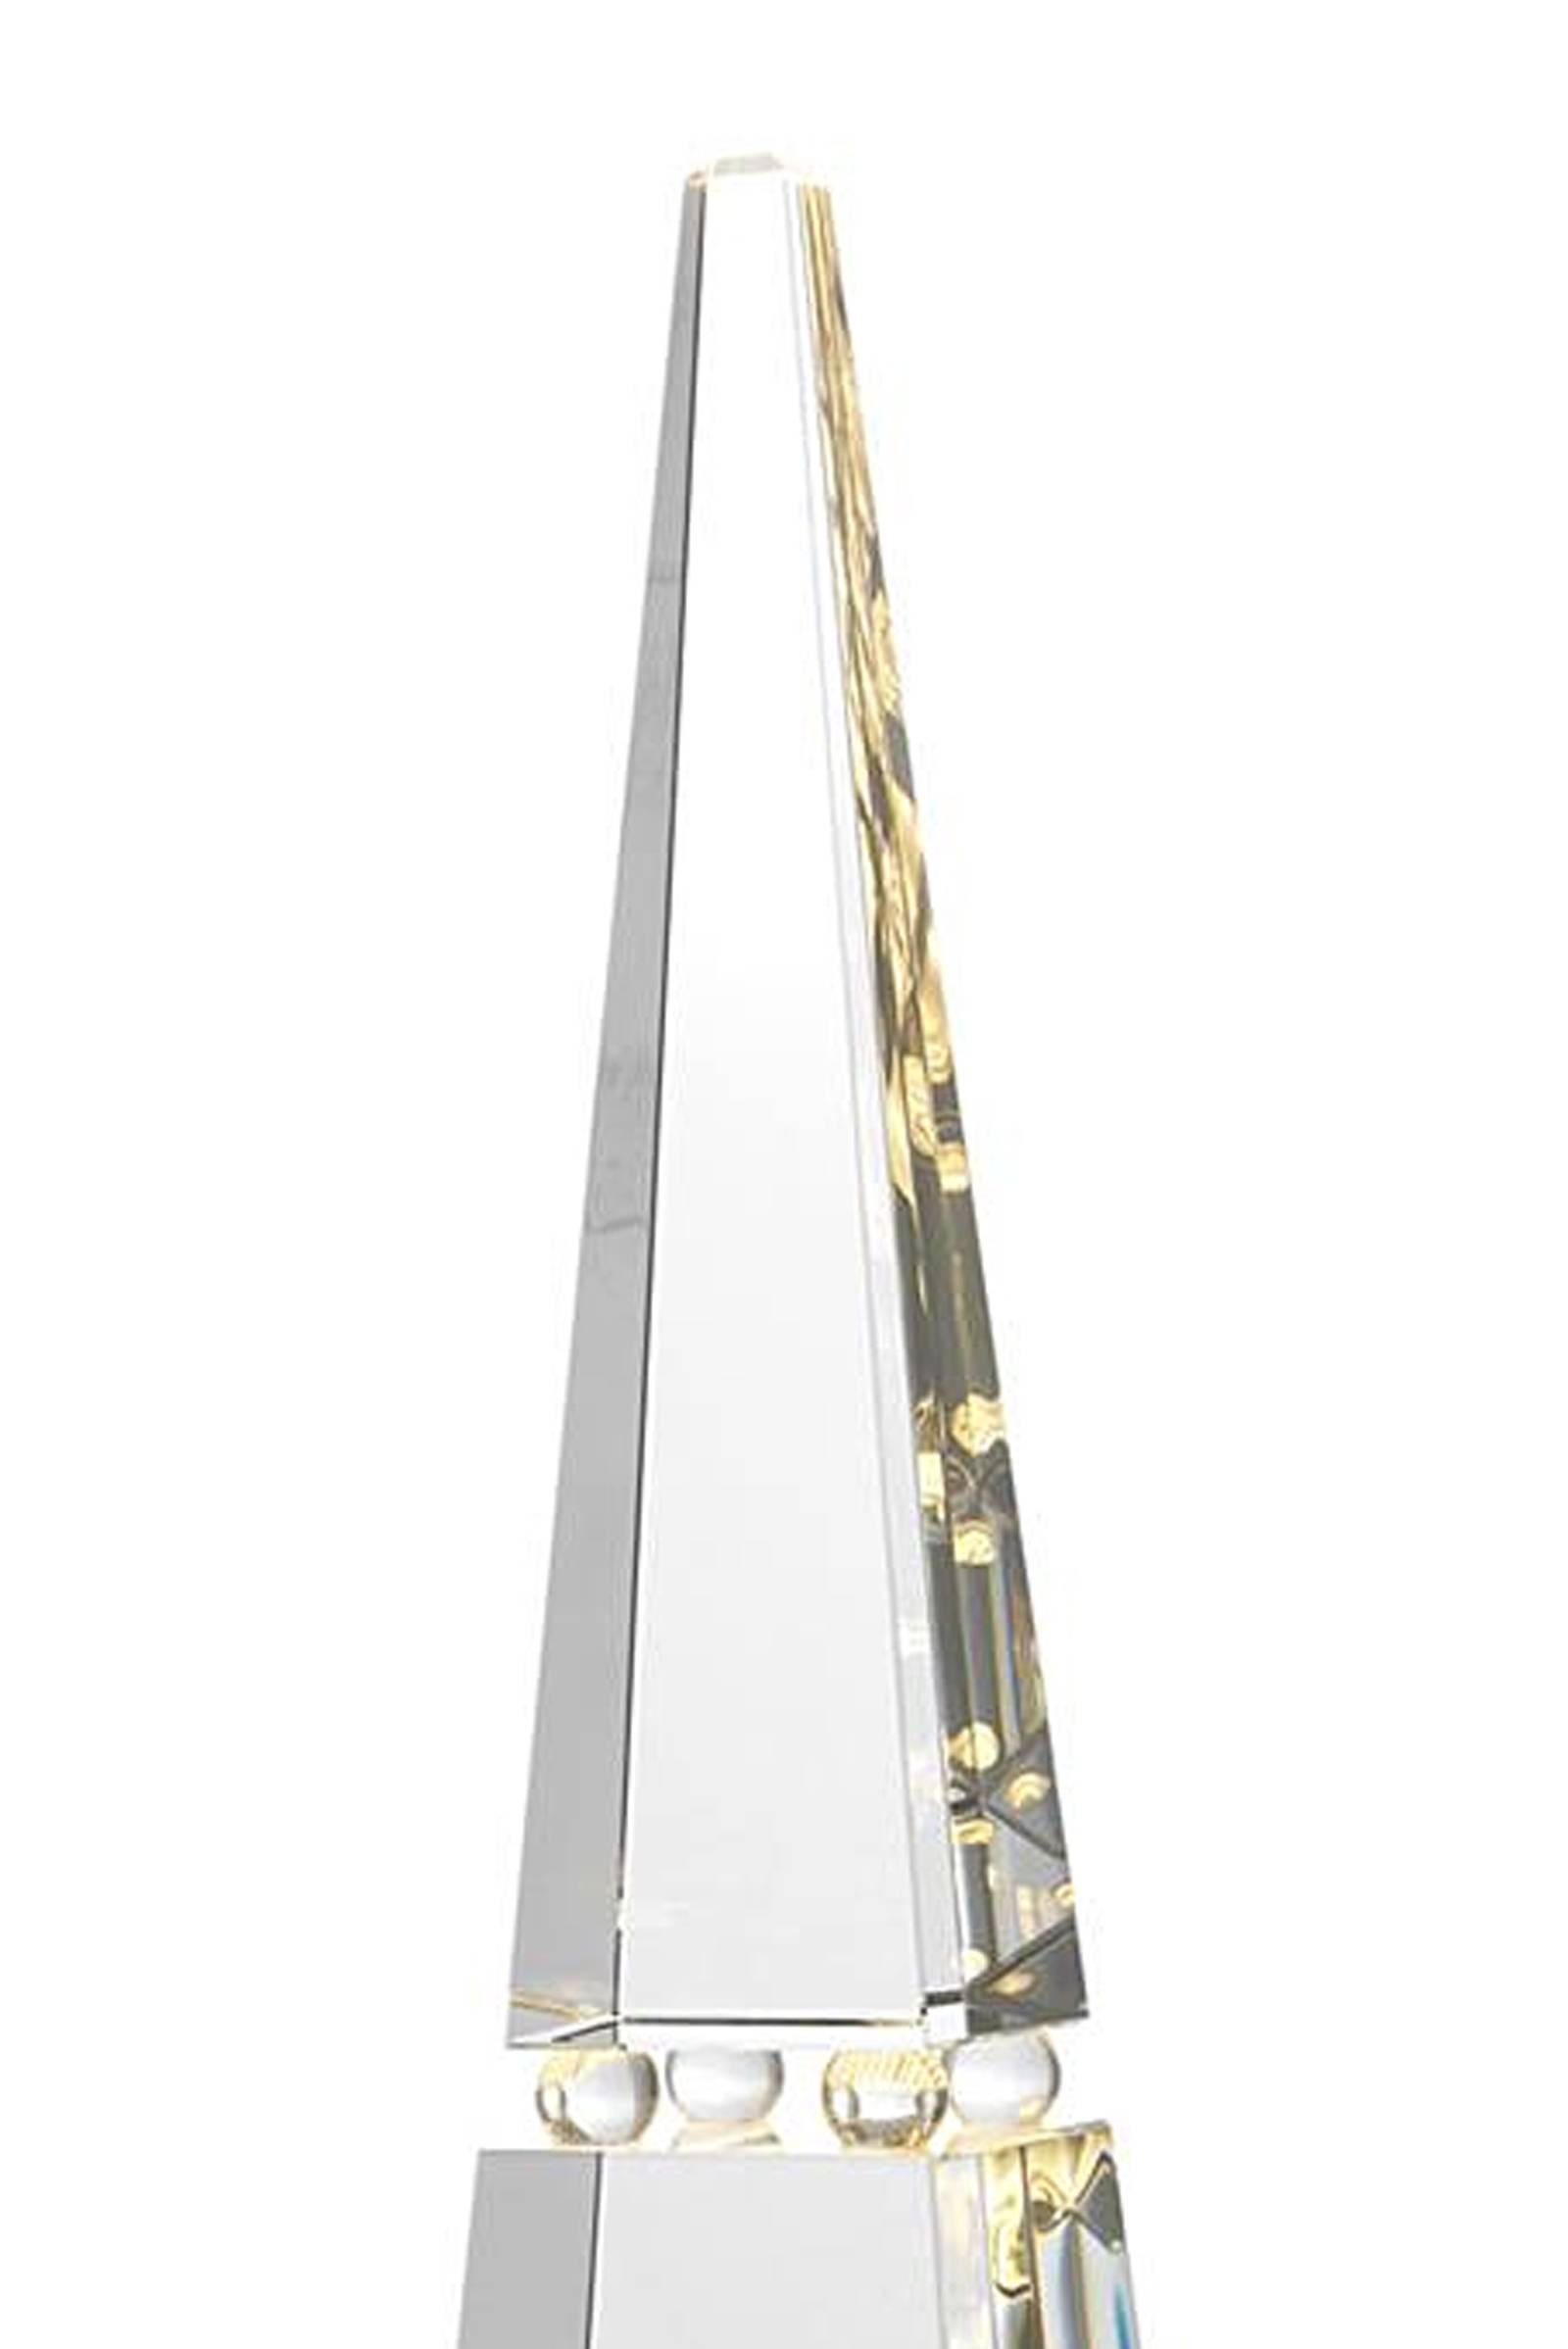 Table lamp Obelisk in crystal glass lighted by
LED base. Base in polished nickel finish.
Original piece with game of light.
